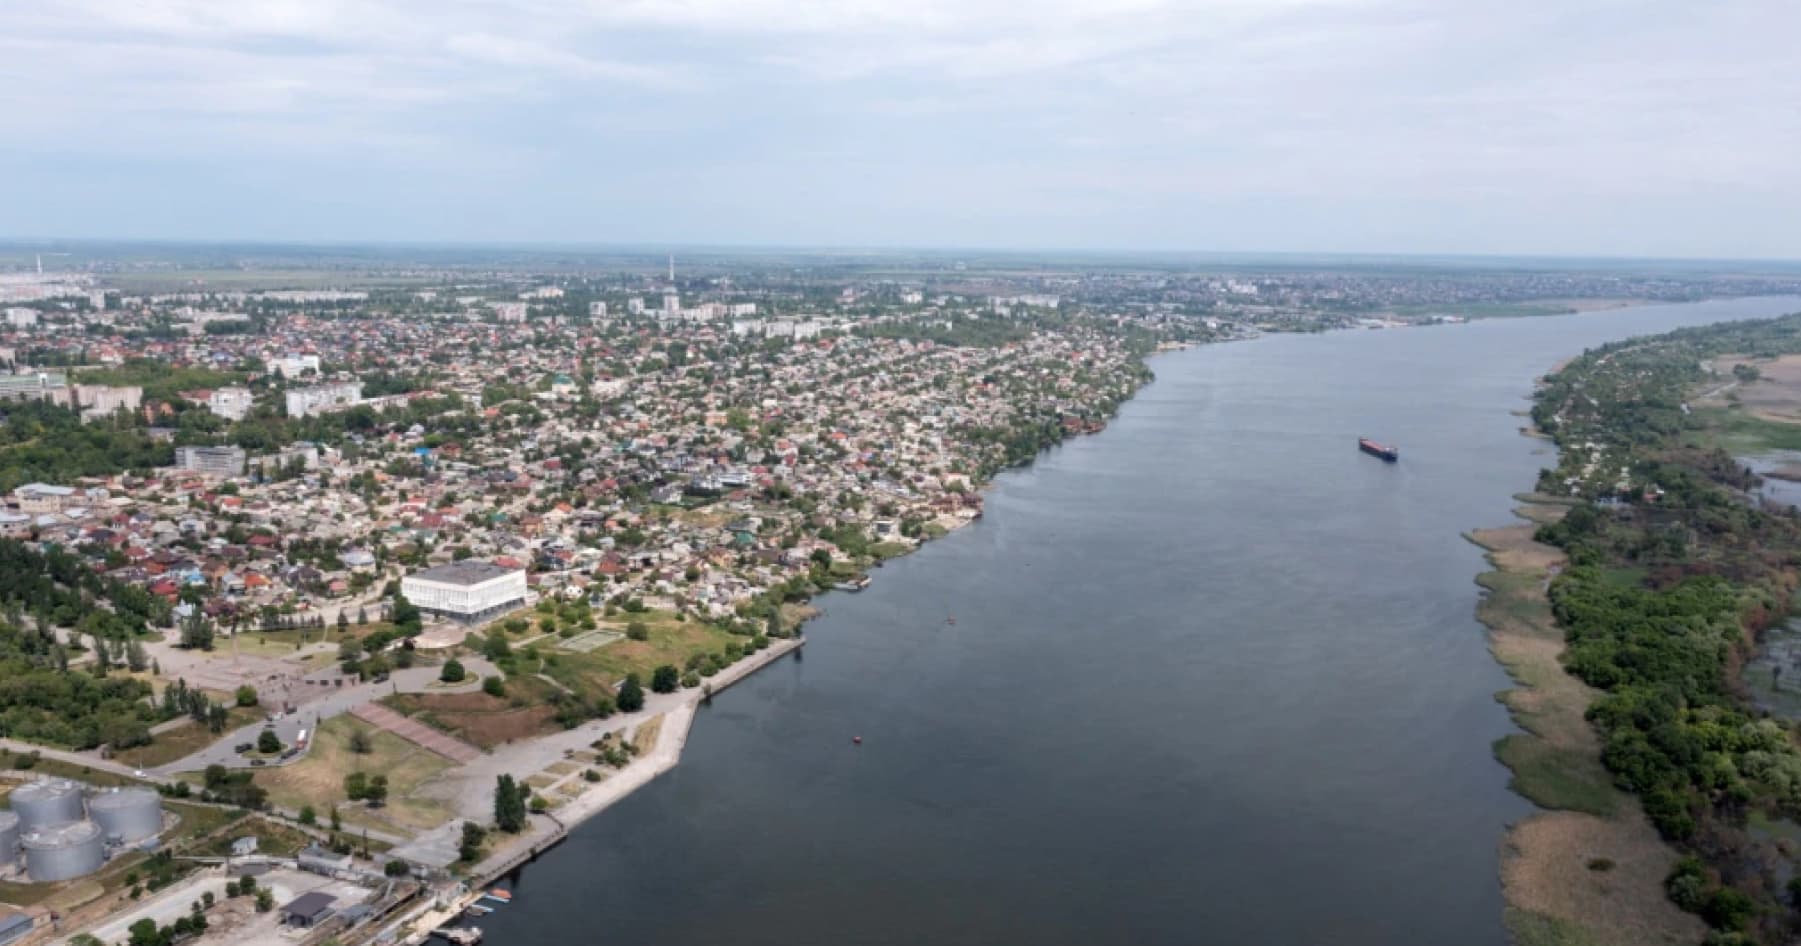 Russians declared Henichesk the so-called "administrative capital" of the temporarily occupied regions of the Kherson region — Russian propaganda publications